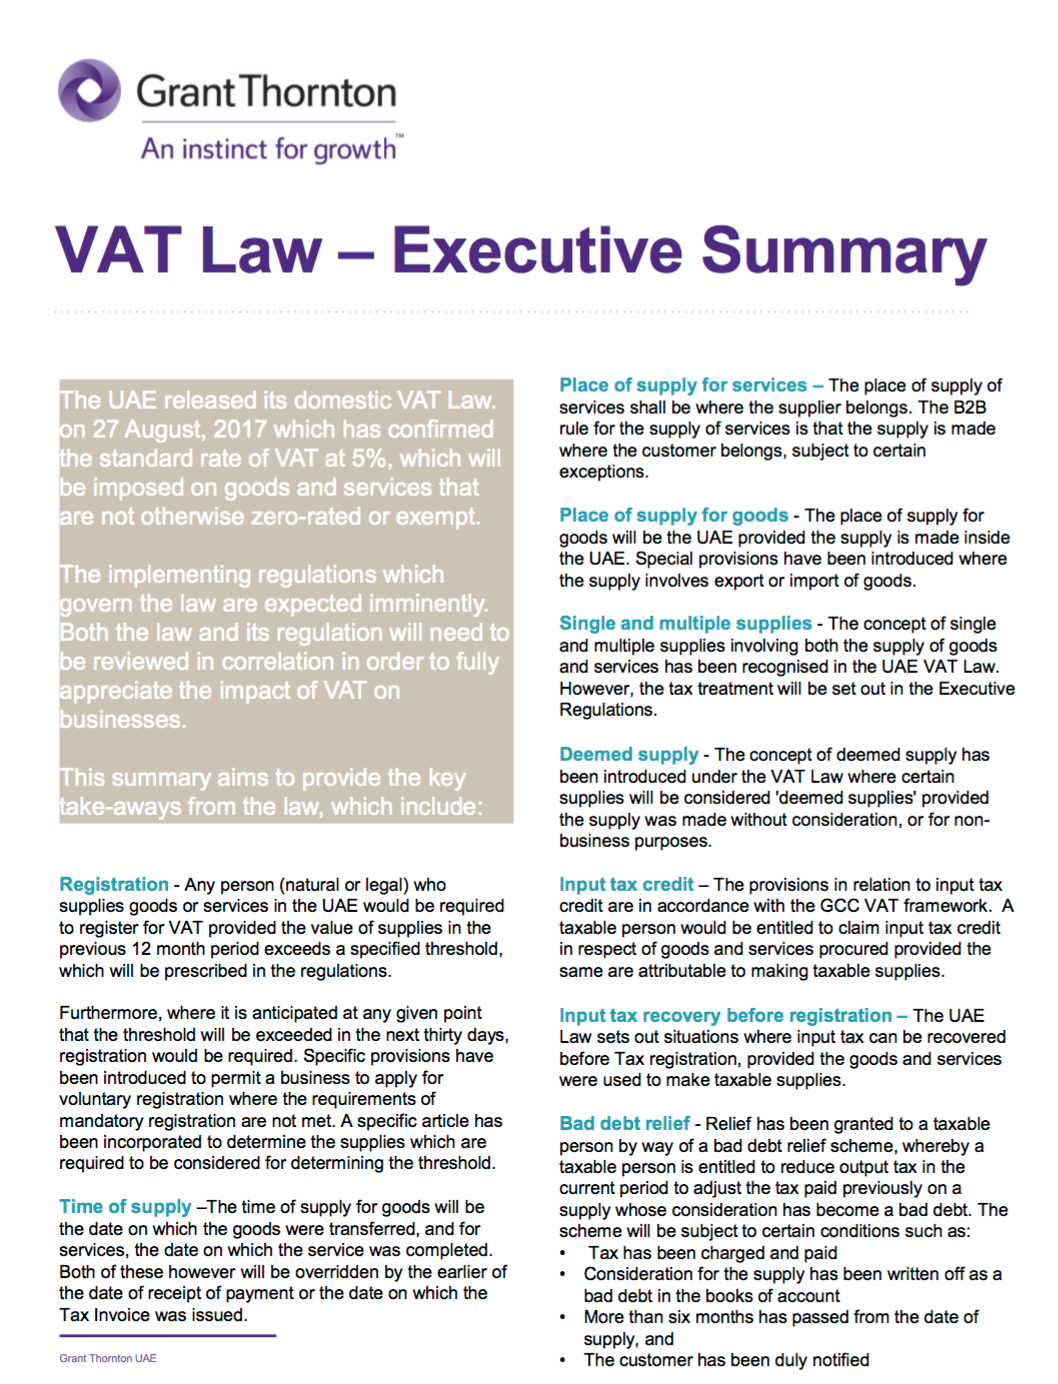 Executive Summary of the VAT Law